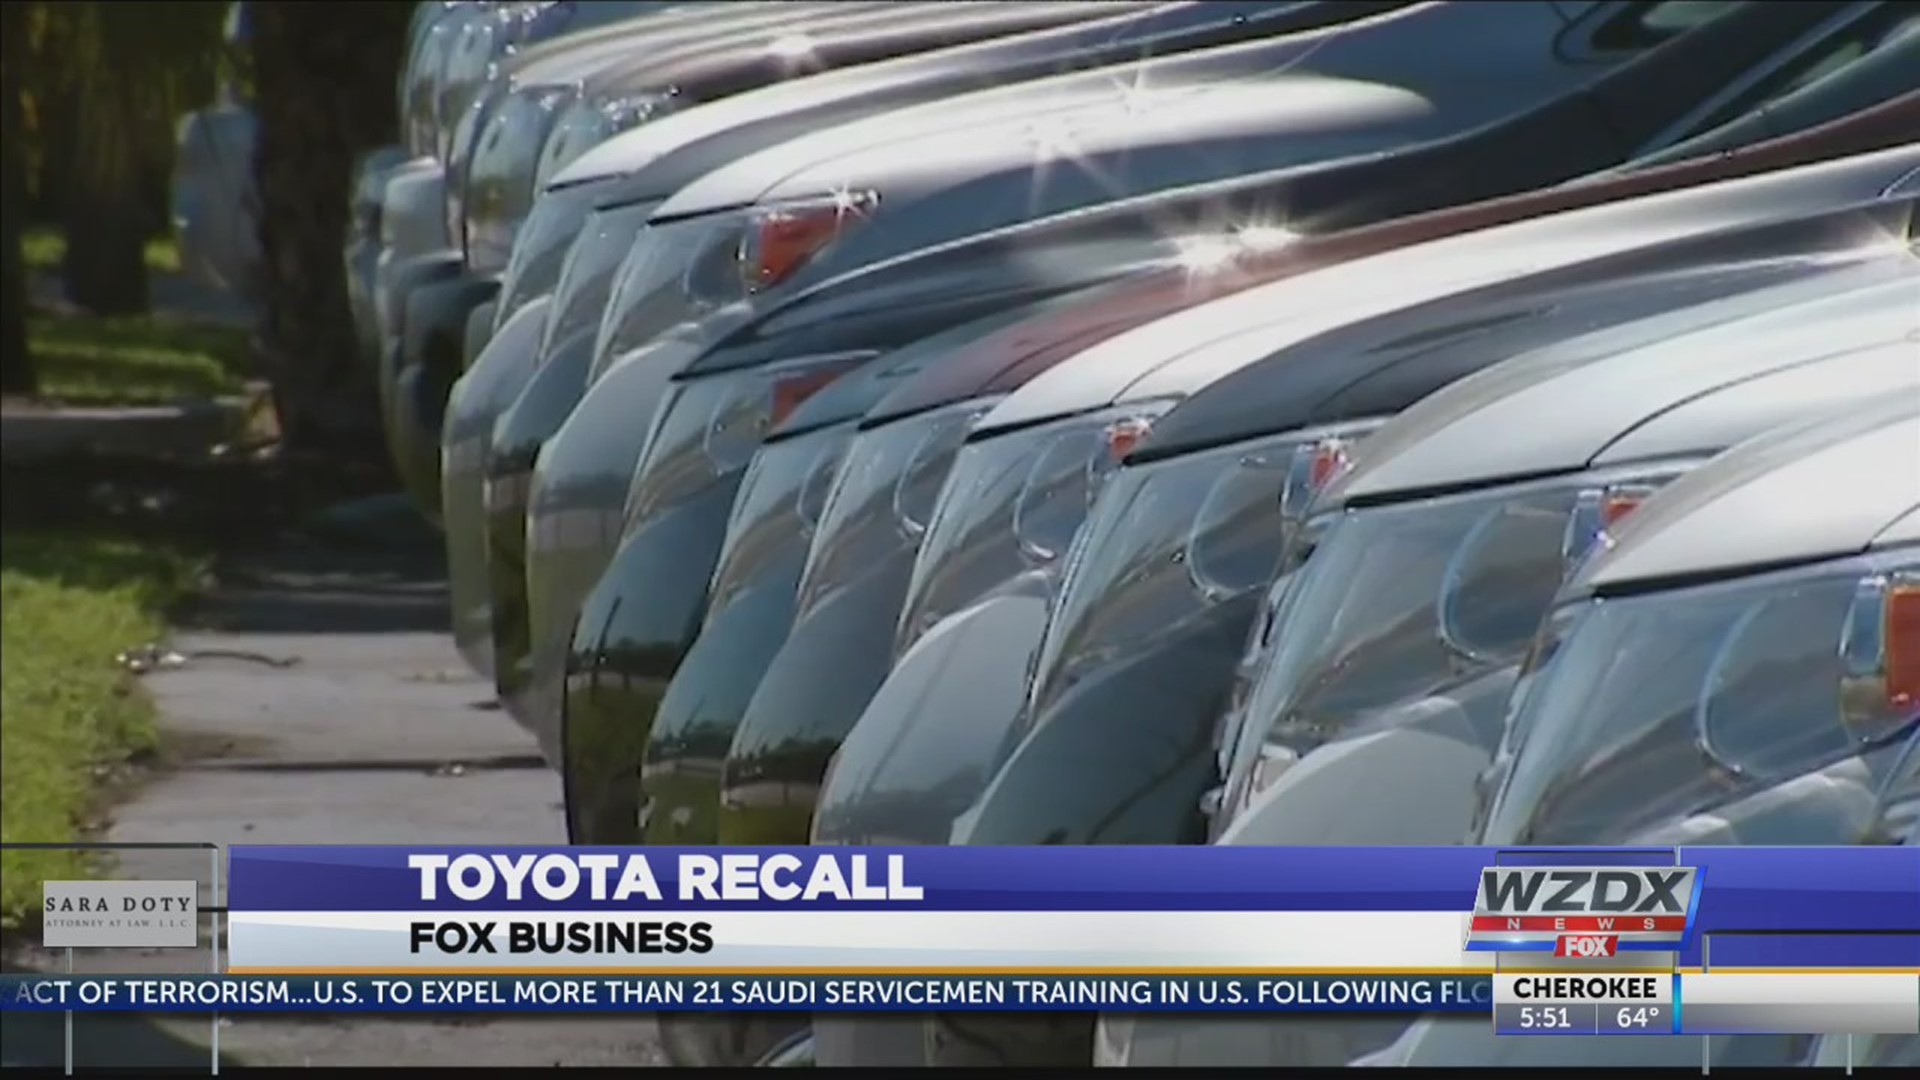 Toyota is recalling nearly 700,000 vehicles in the U.S. because the fuel pumps can fail and cause engines to stall. That can increase the risk of a crash.